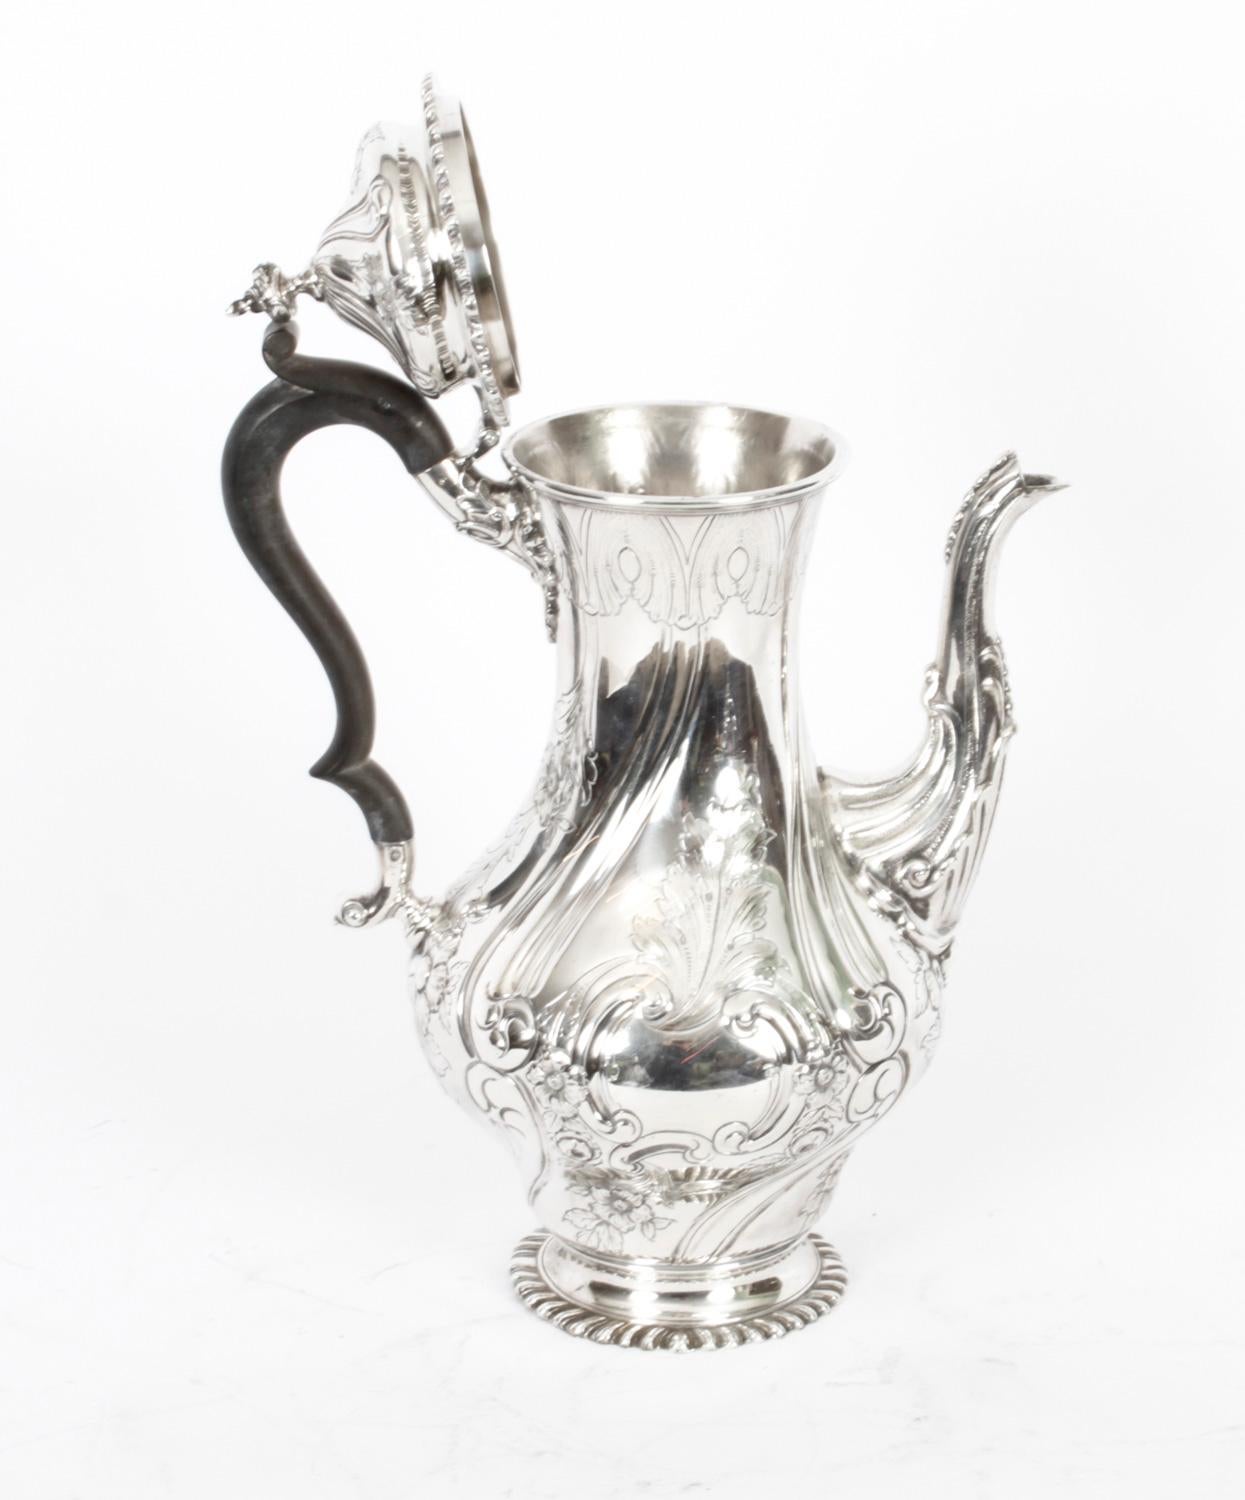 This is a lovely antique Victorian silver plated coffee pot bearing the makers mark of the renowned silversmiths Elkington & Co.
 
It is decorated with an embossed and chased Rococo foliate and floral ornamentation, with an acorn finial to the lid